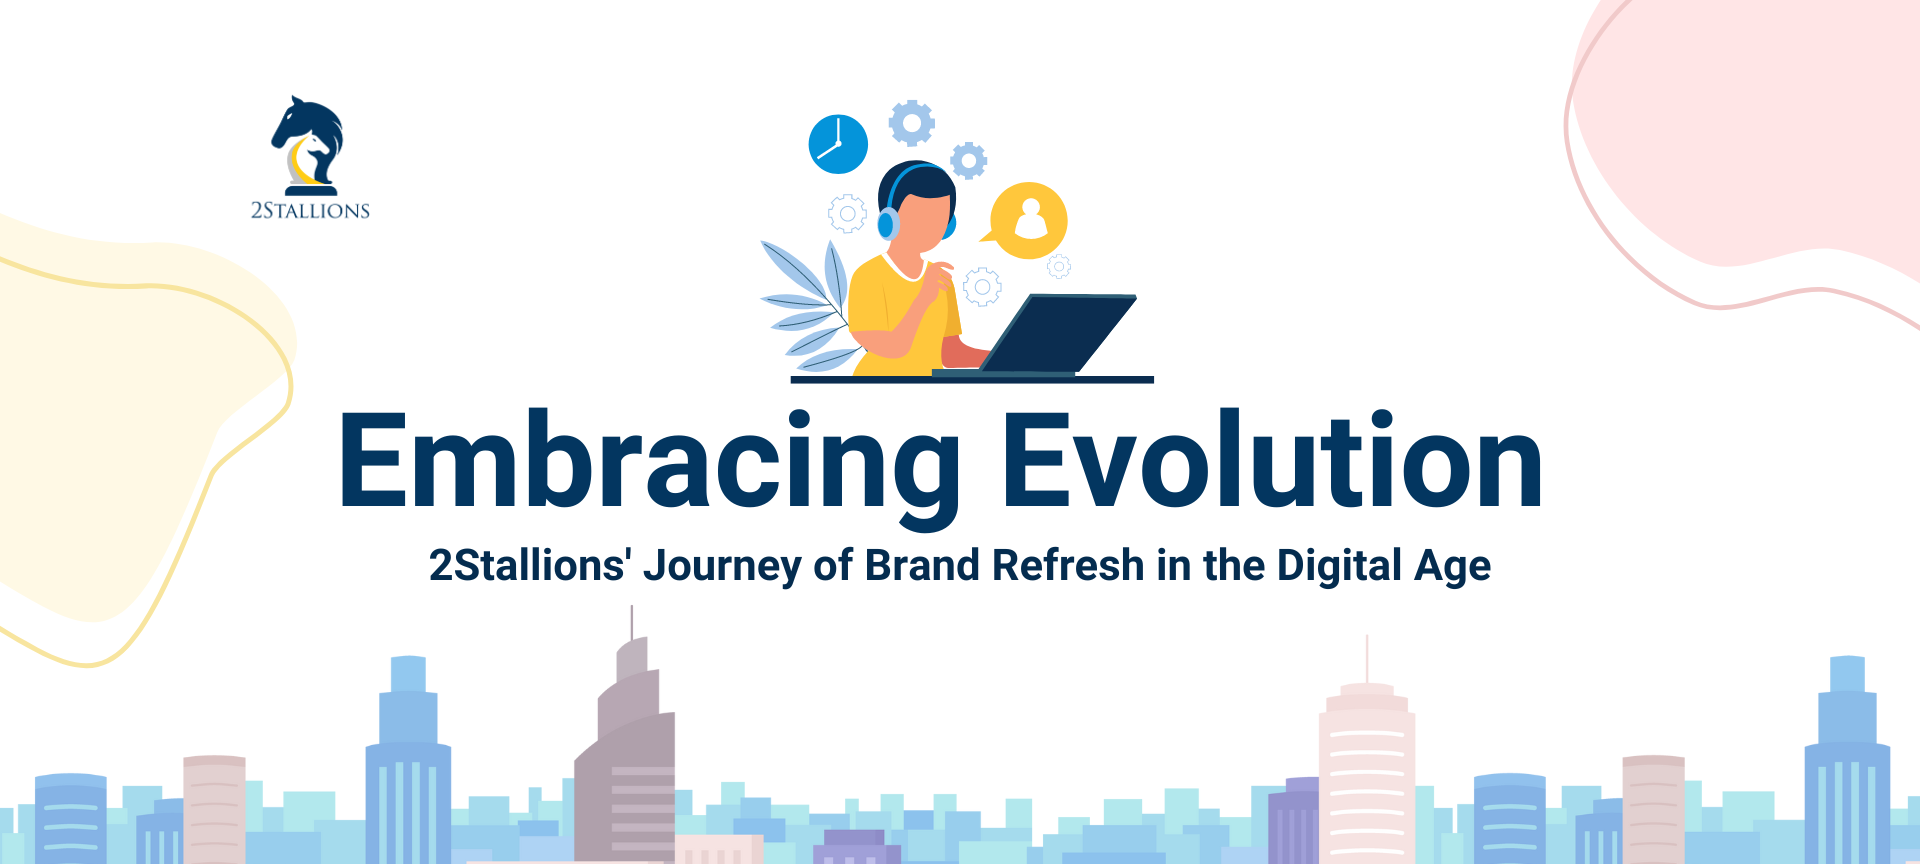 Embracing Evolution: 2Stallions' Journey of Brand Refresh in the Digital Age